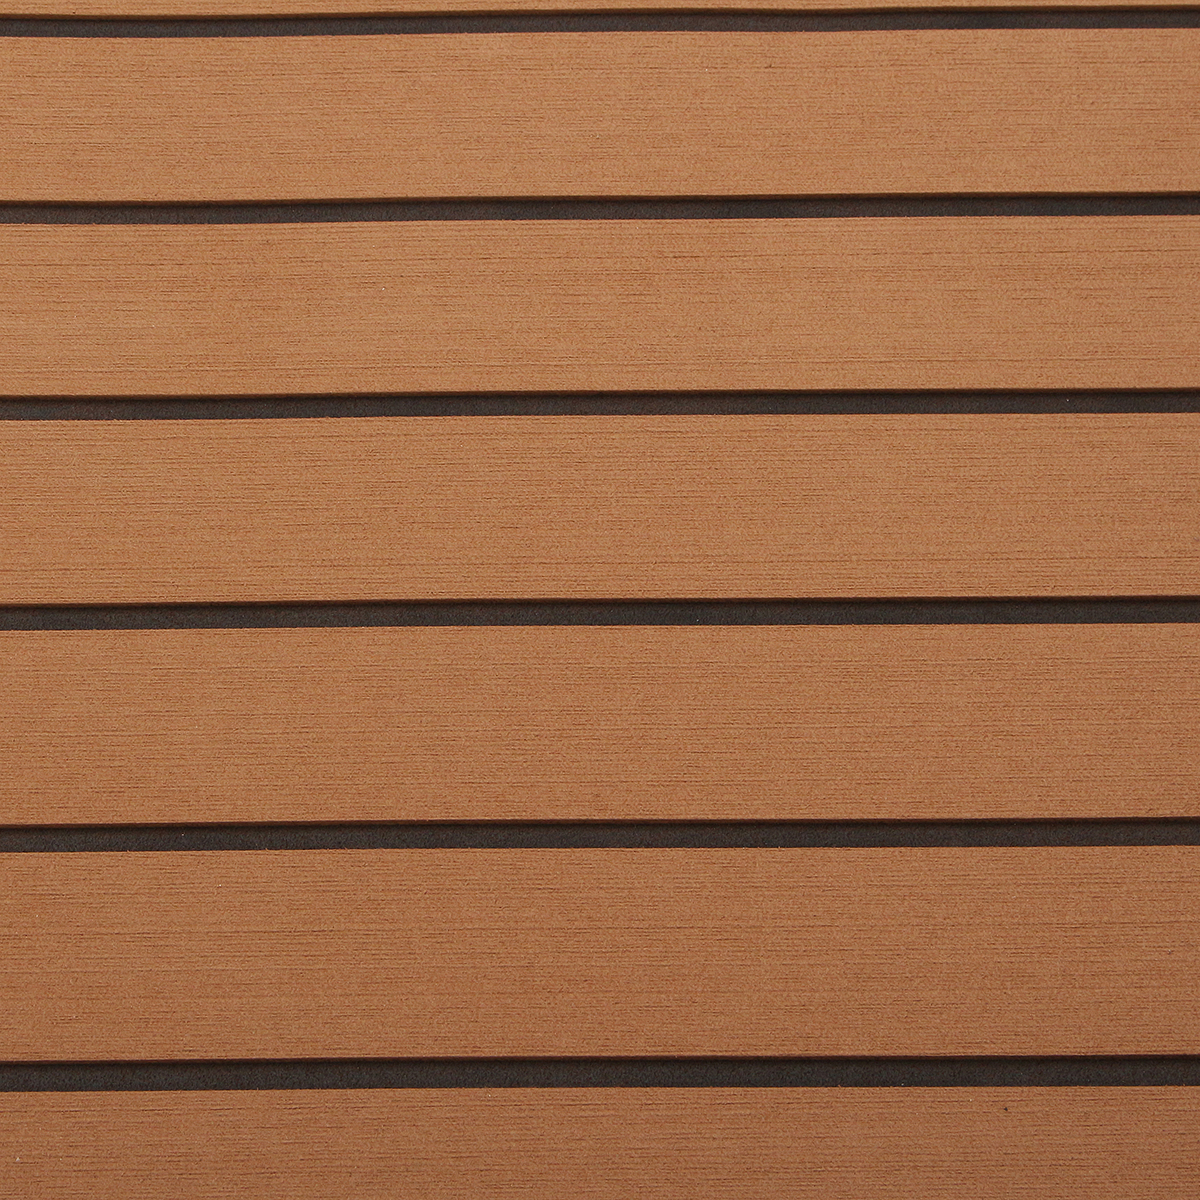 Find 300cm x 90cm x 6mm EVA Foam Faux Teak Sheet Brown with Black Lines Boat Yacht Synthetic Teak for Sale on Gipsybee.com with cryptocurrencies